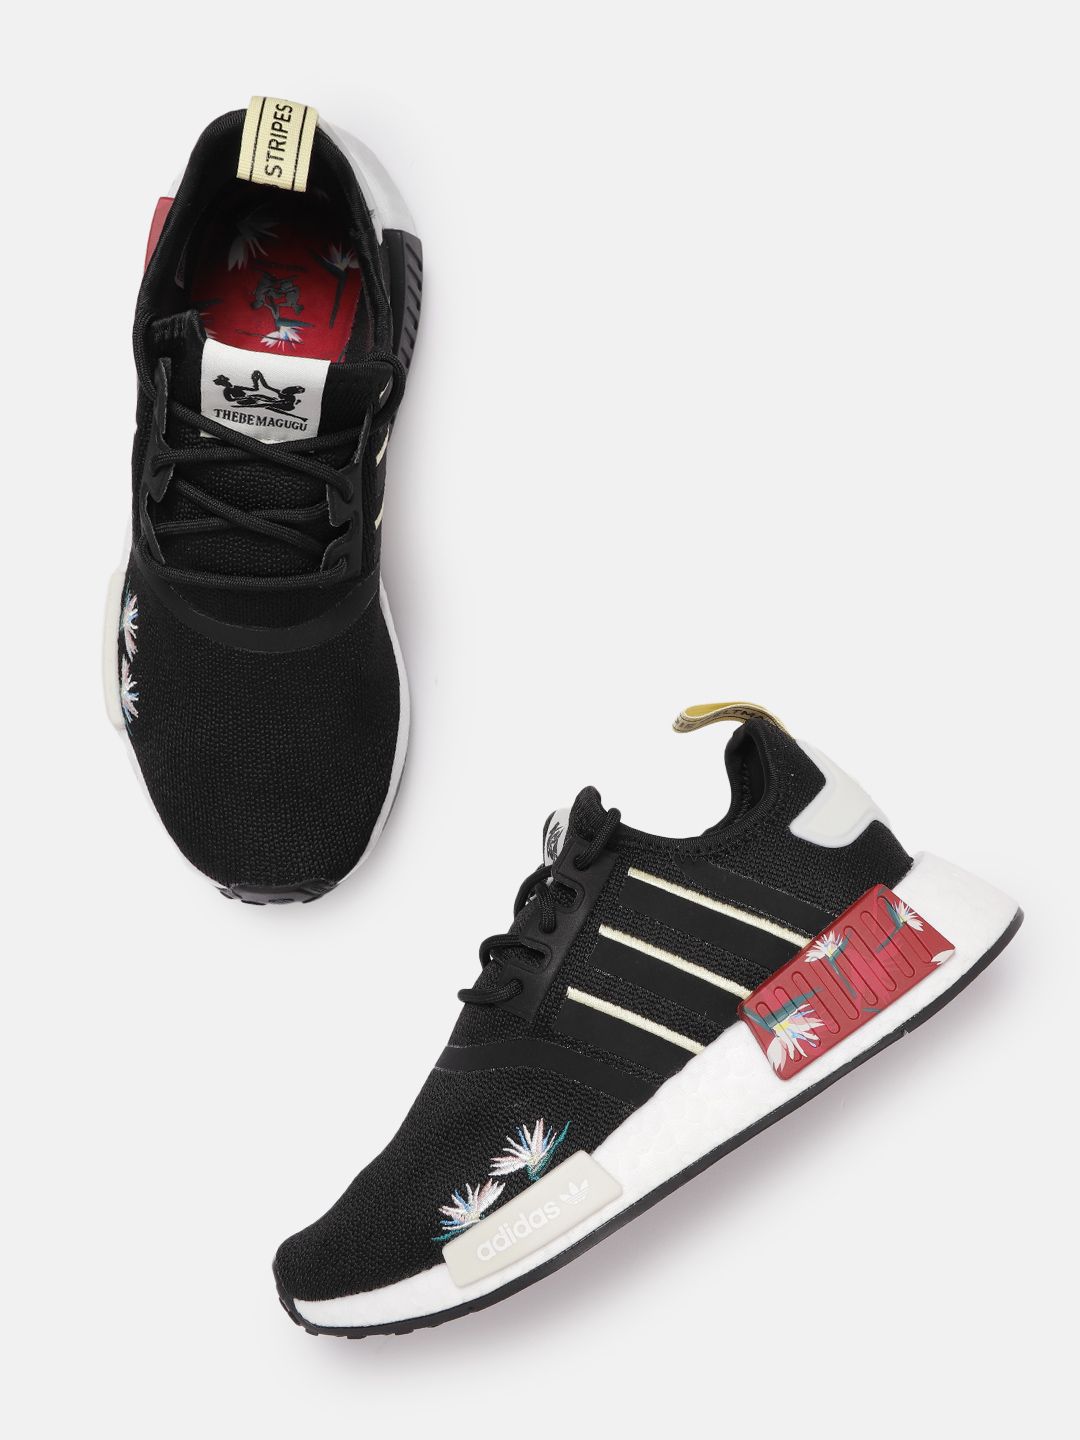 ADIDAS Originals Women Black Floral Embroidered NMD_R1 Sneakers Price in India